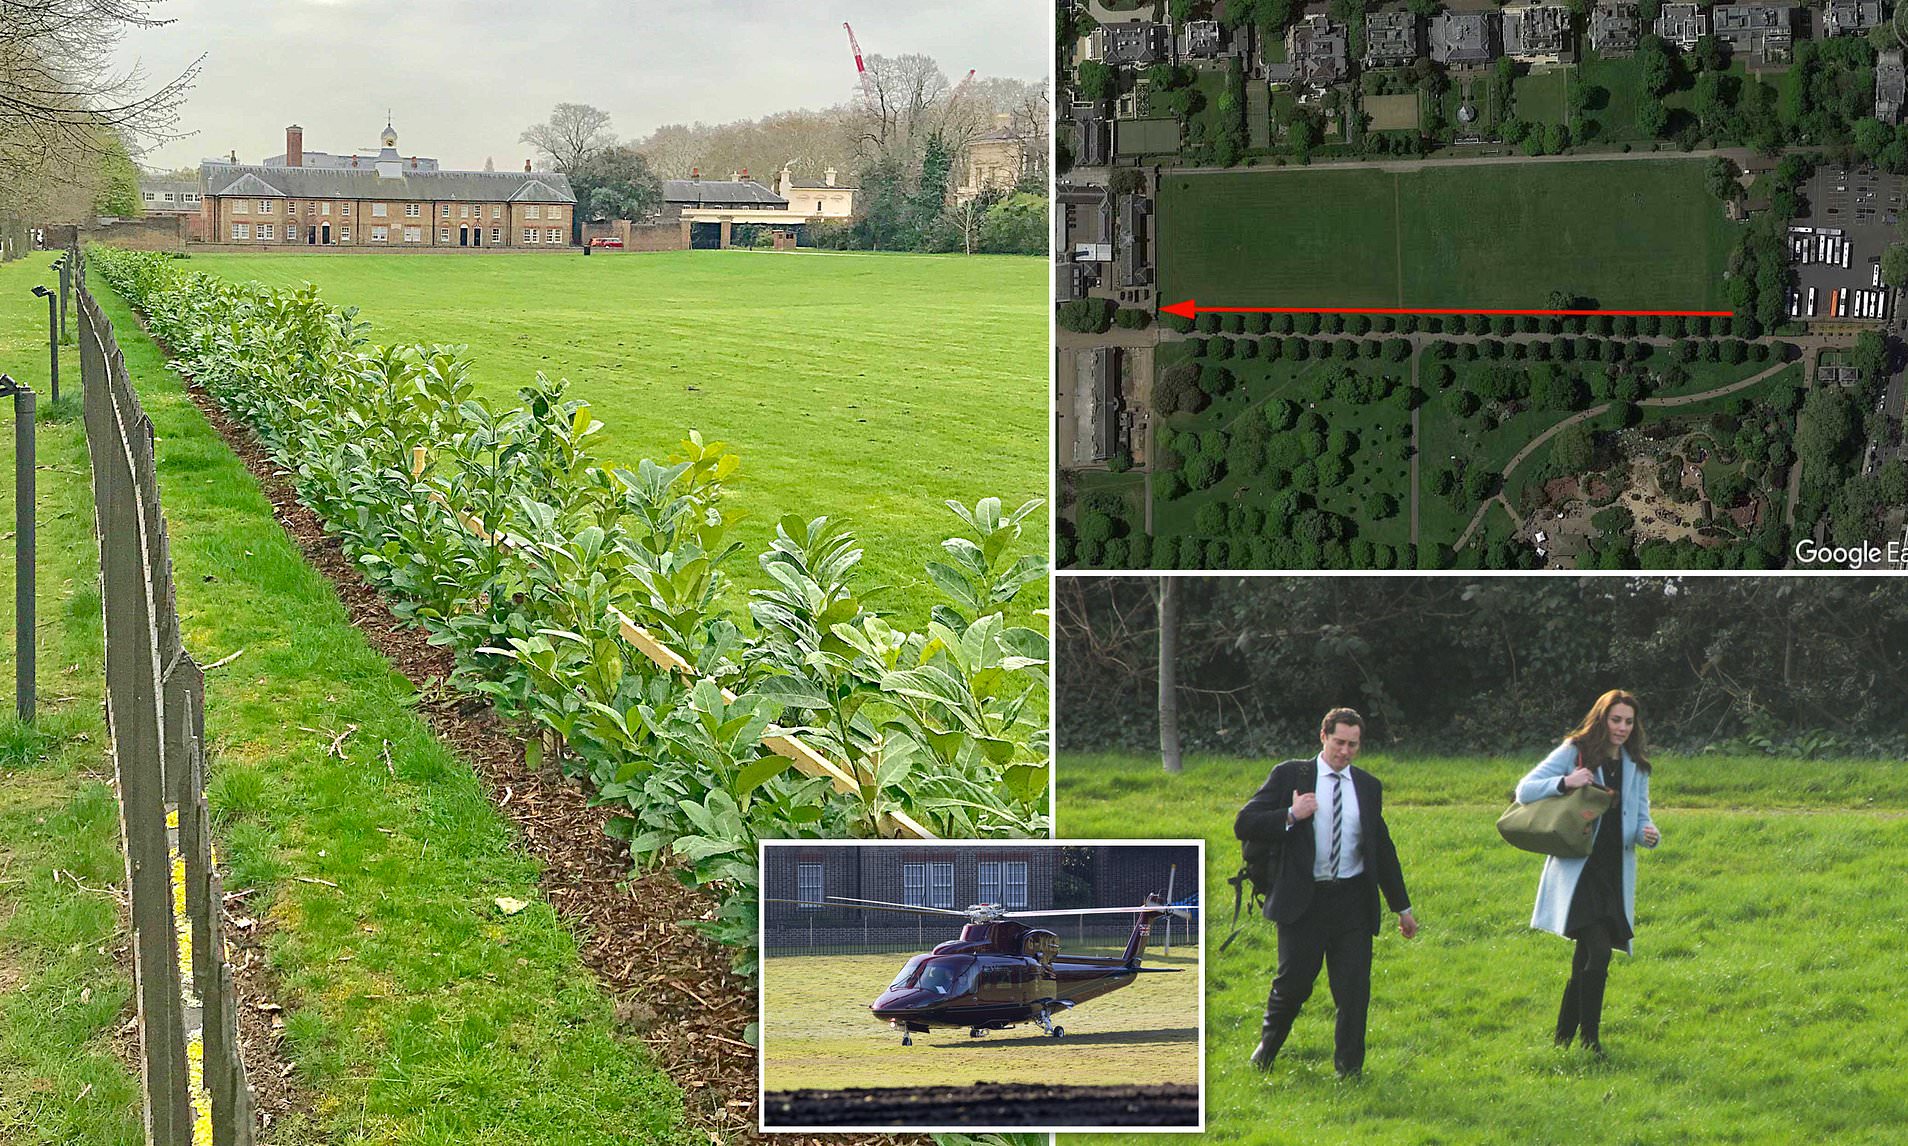 Kensington Palace spends £15,000 extending massive 950ft-long hedge 'to block the public from watching royals flying in and out by helicopter'